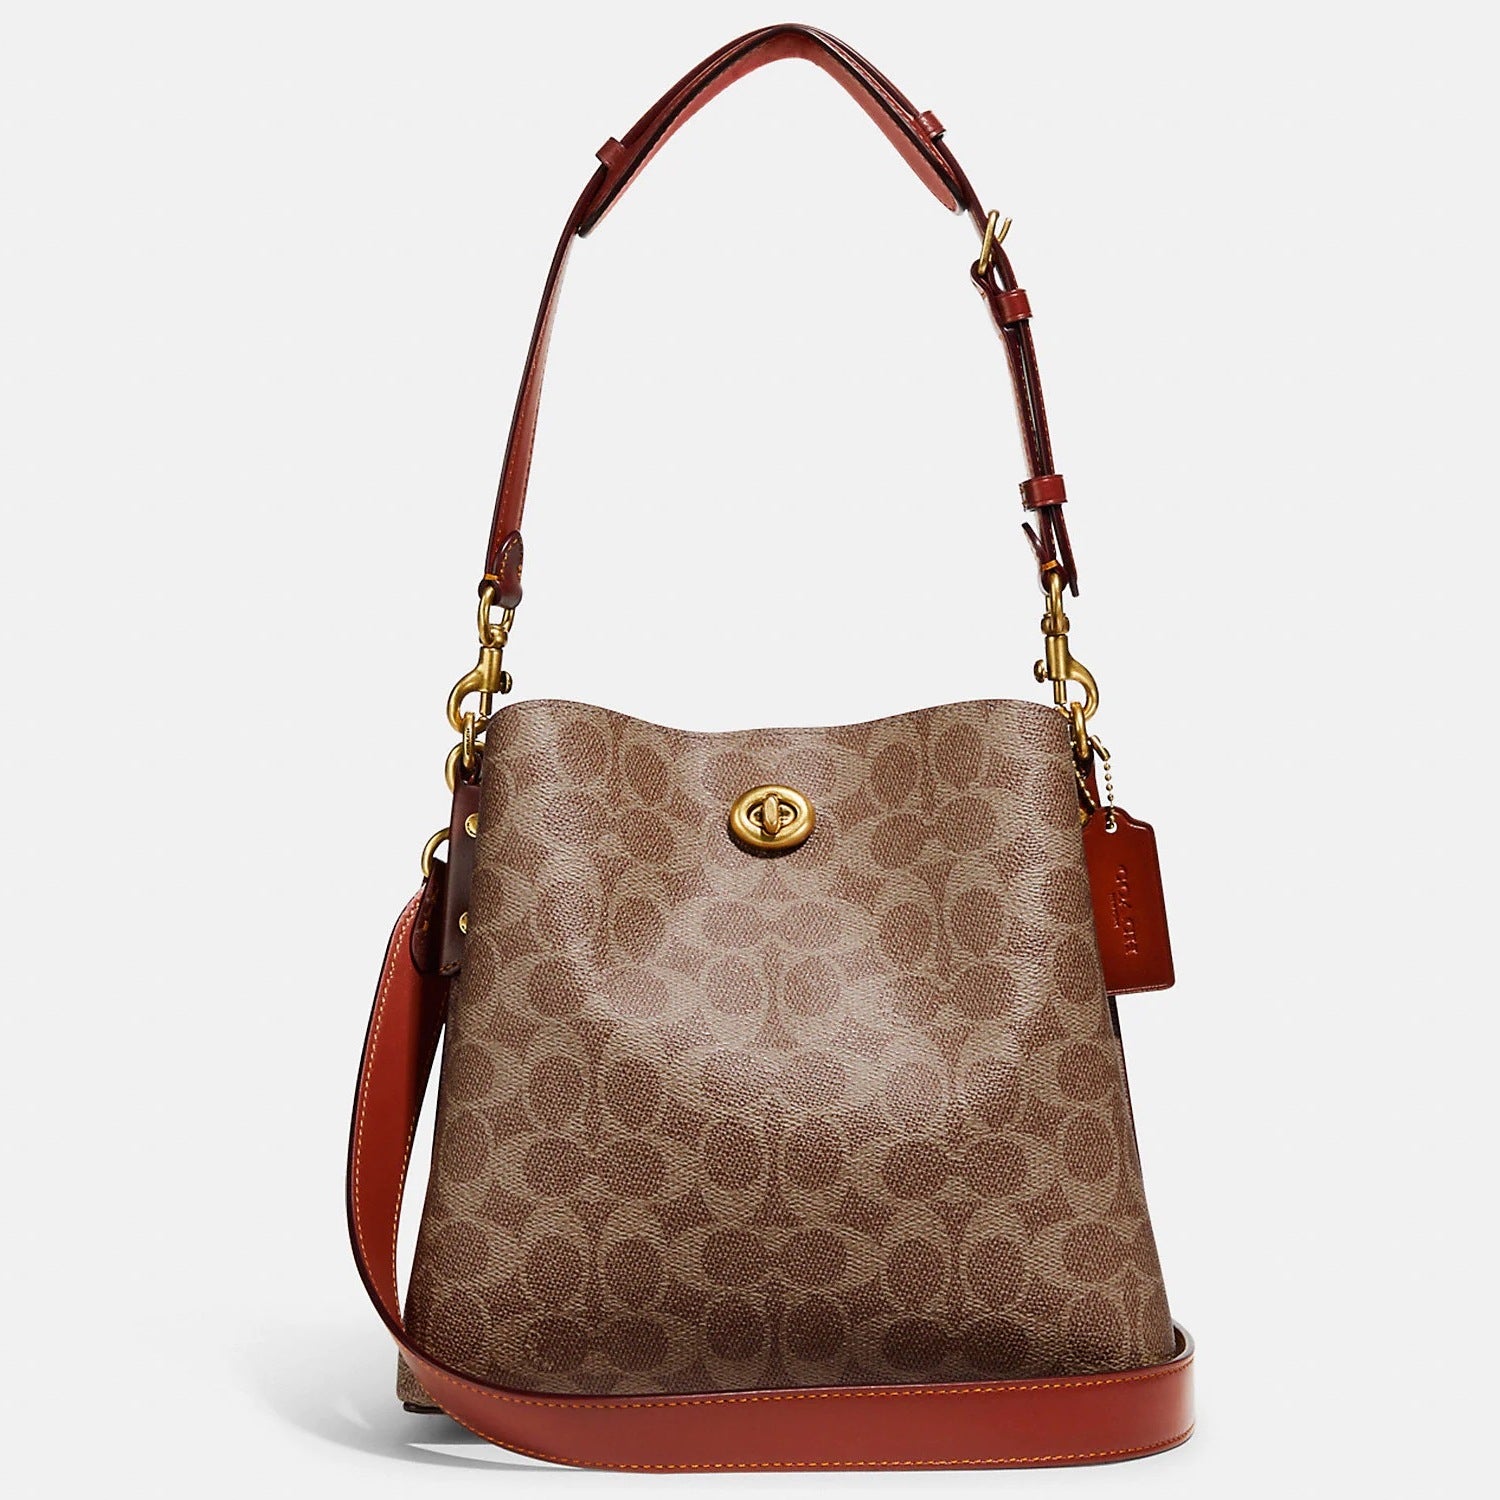 Coach Willow Bucket Bag In Signature Canvas in Tan Rust (C3890)